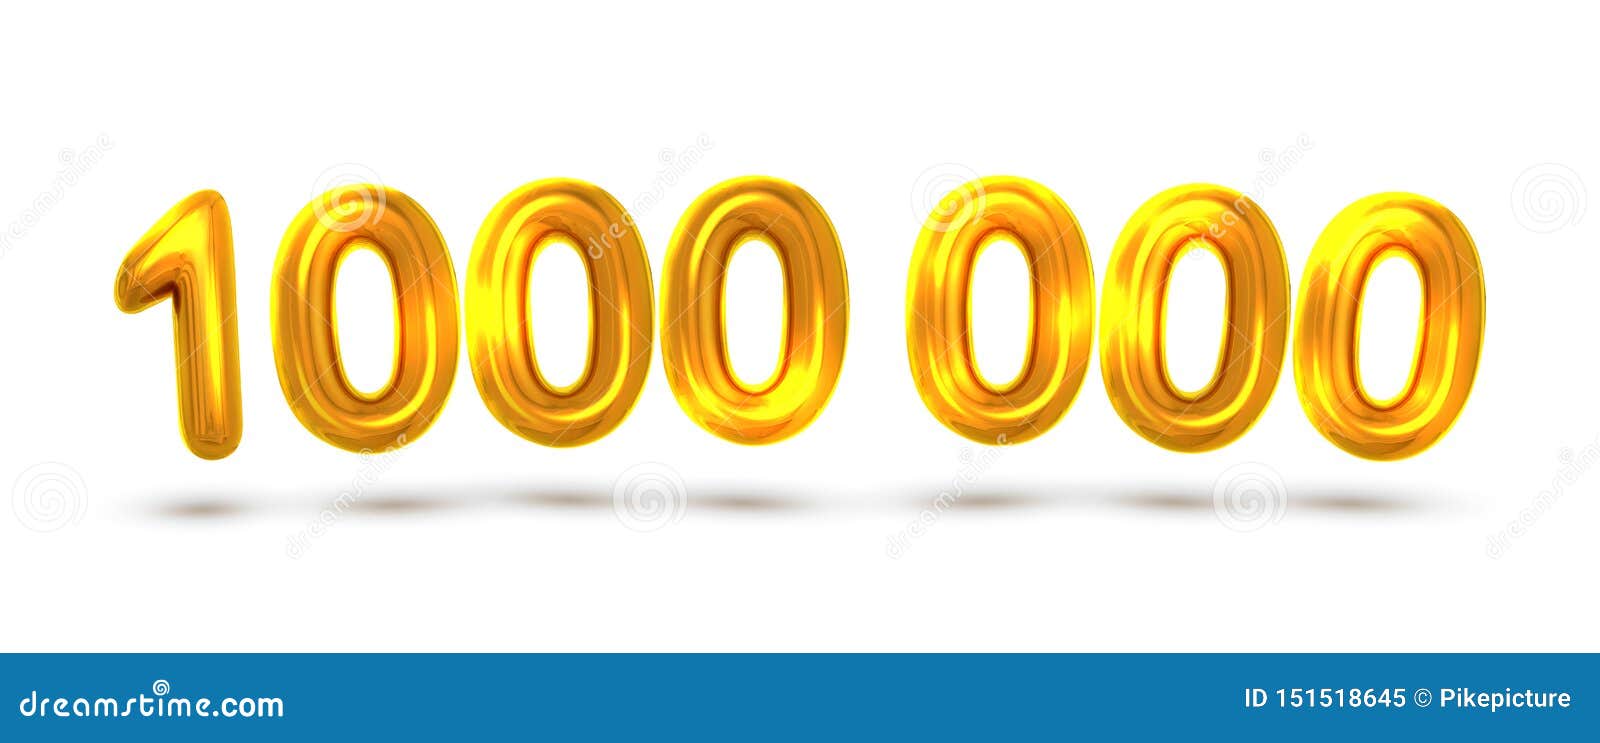 Balloon Shaped Number One Million Banner Vector Stock ...